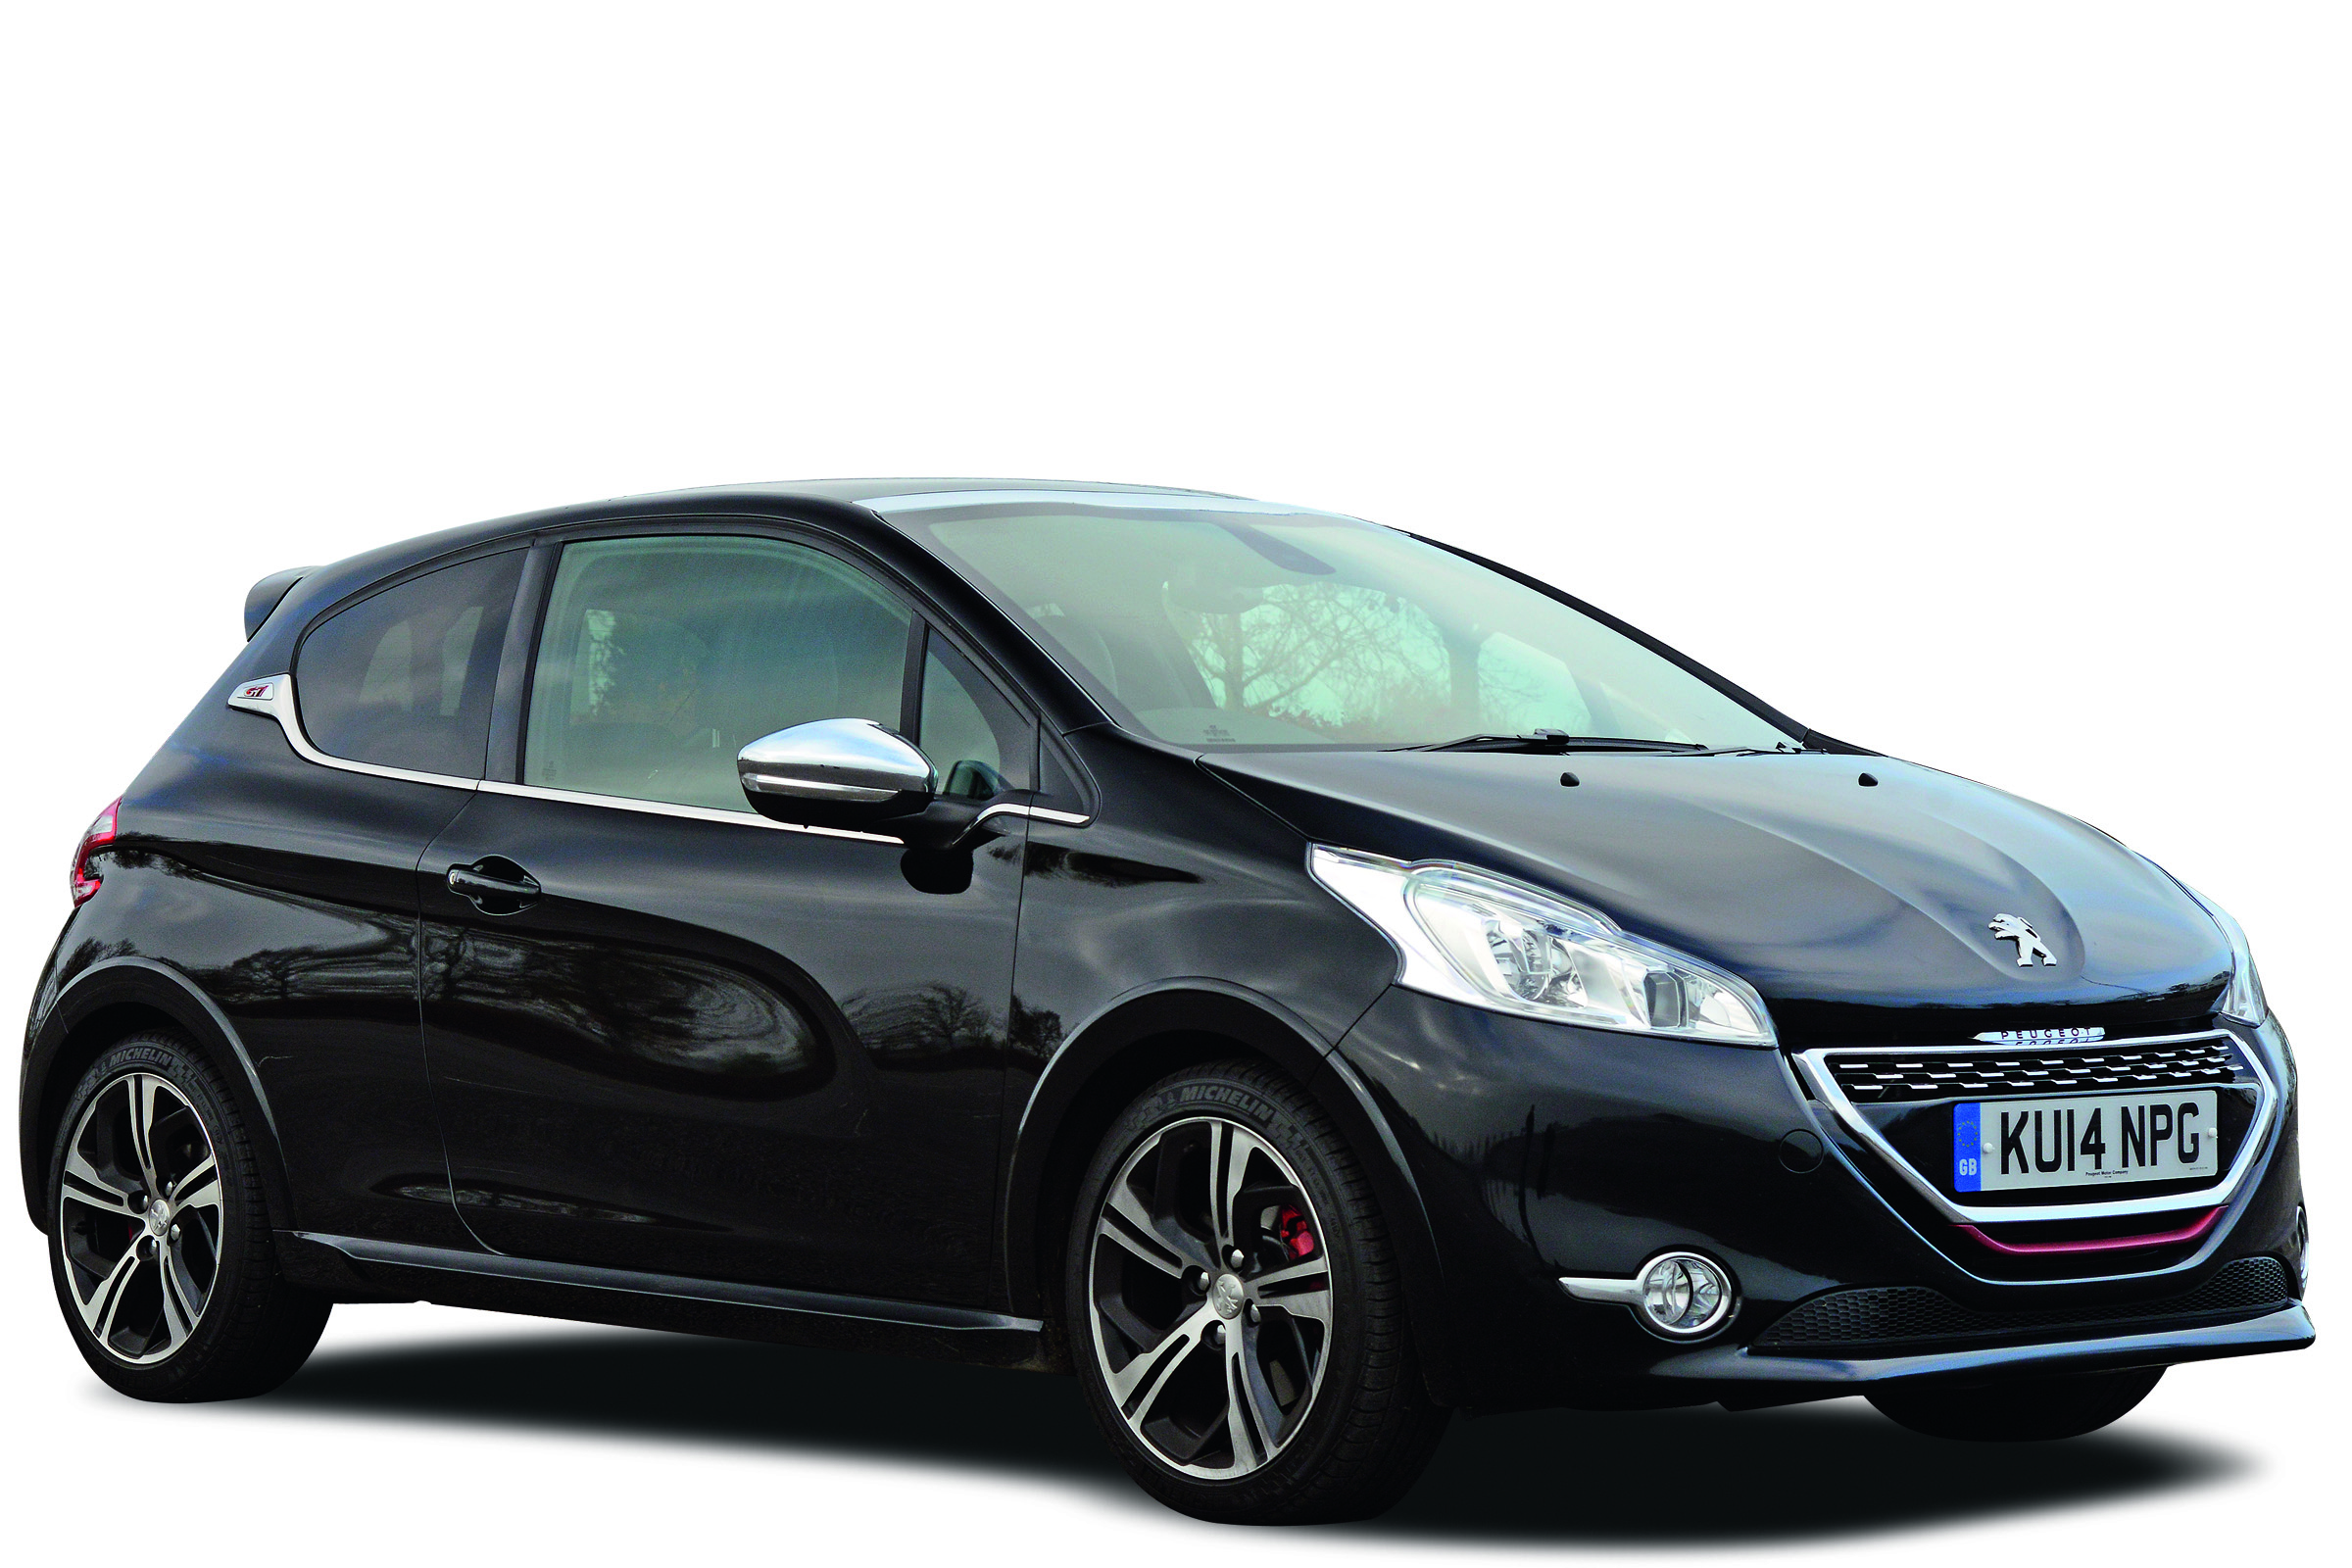 Peugeot 8 Gti Hatchback Owner Reviews Mpg Problems Reliability Carbuyer